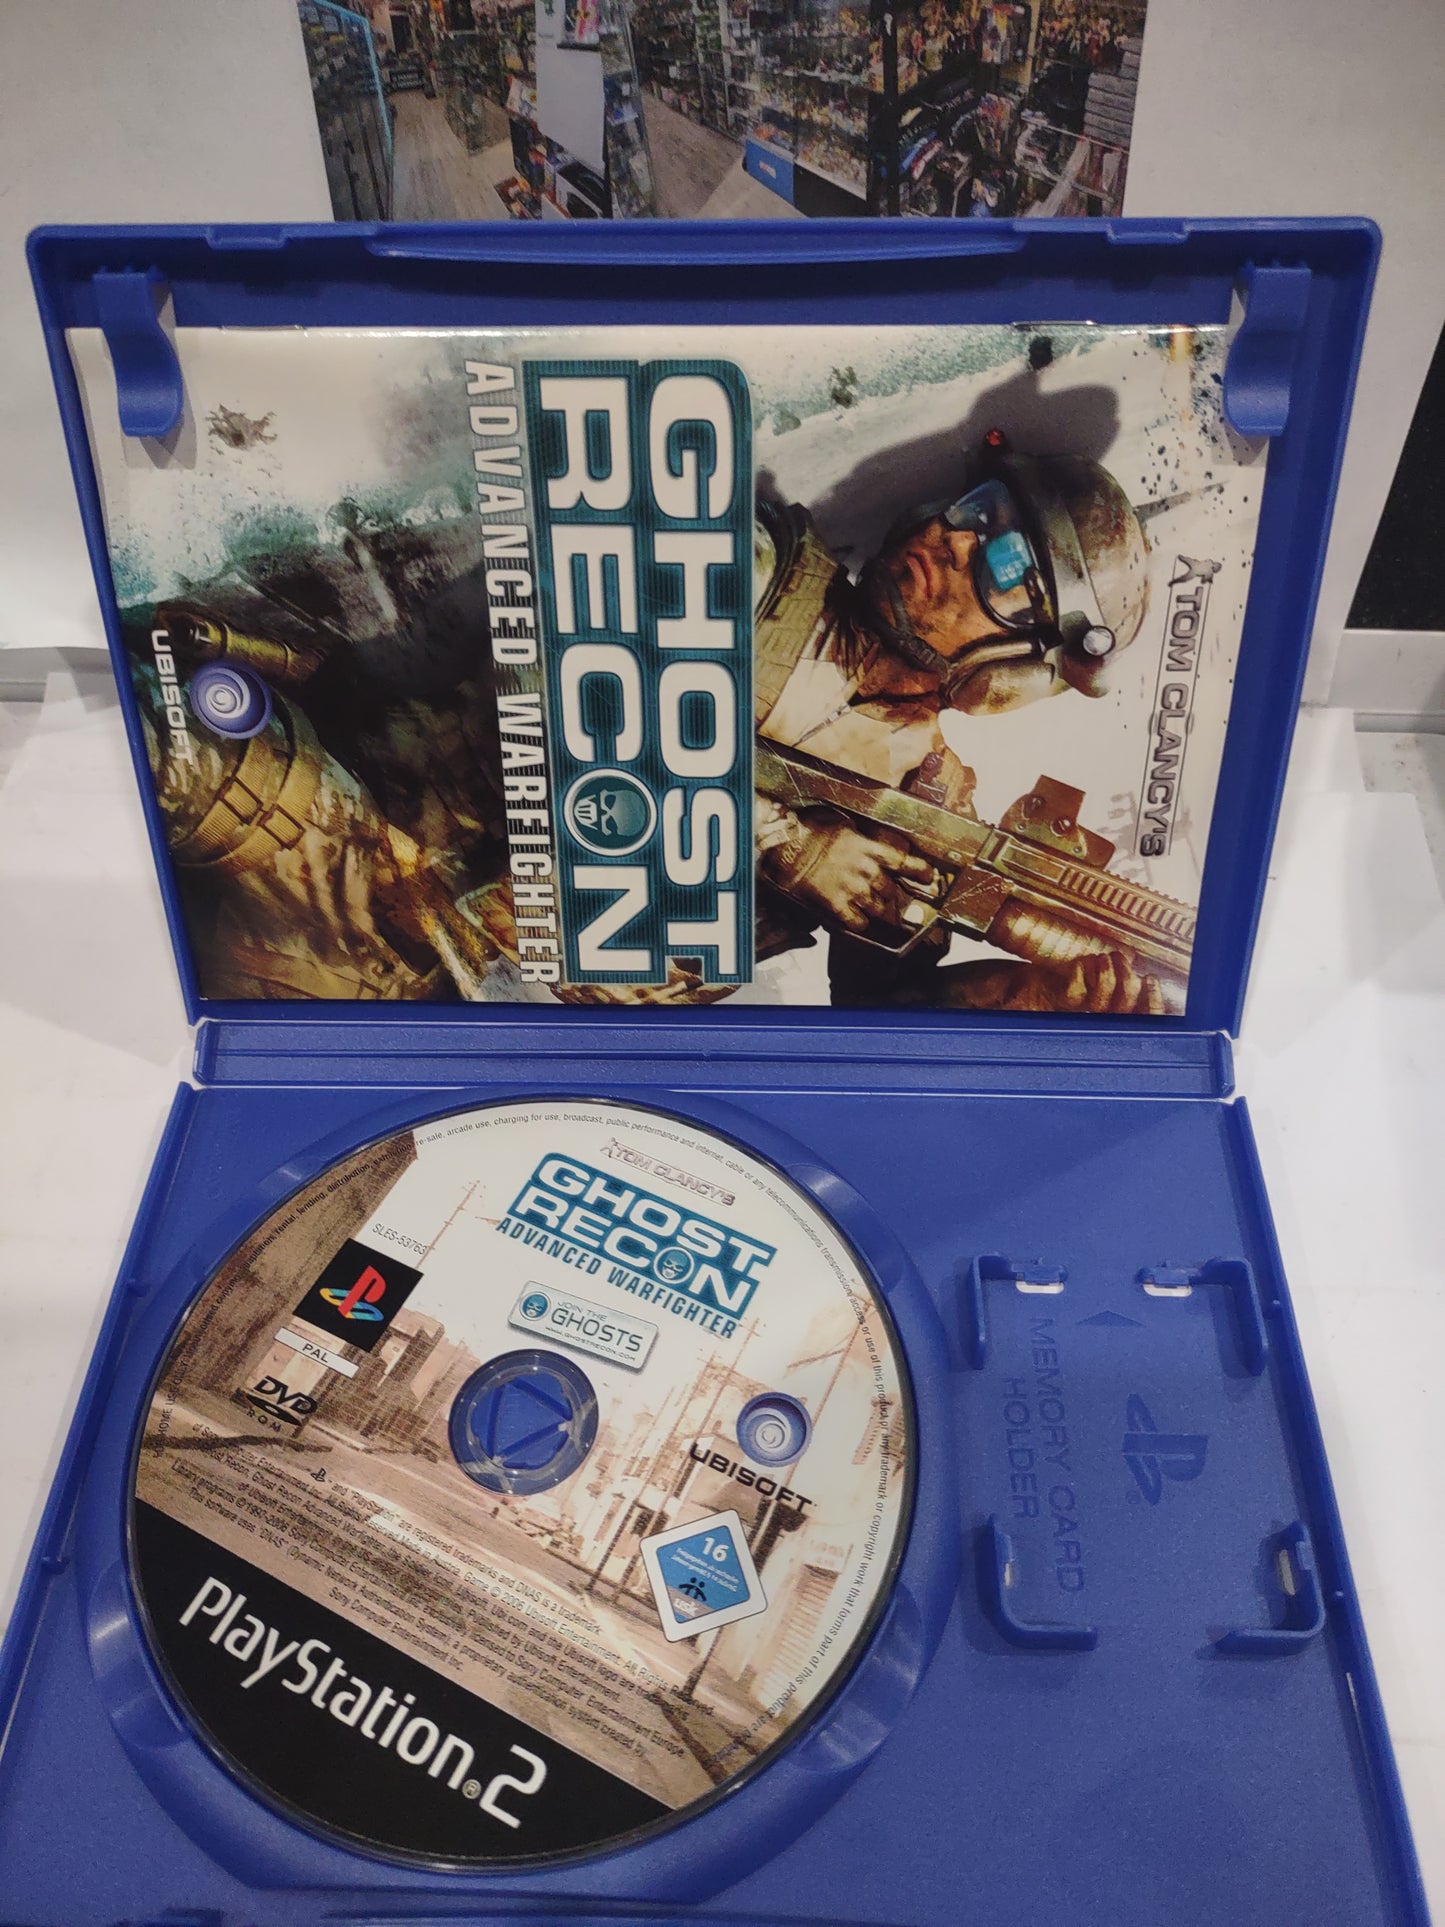 Gioco PlayStation PS2 Ghost recon advanced warfighter